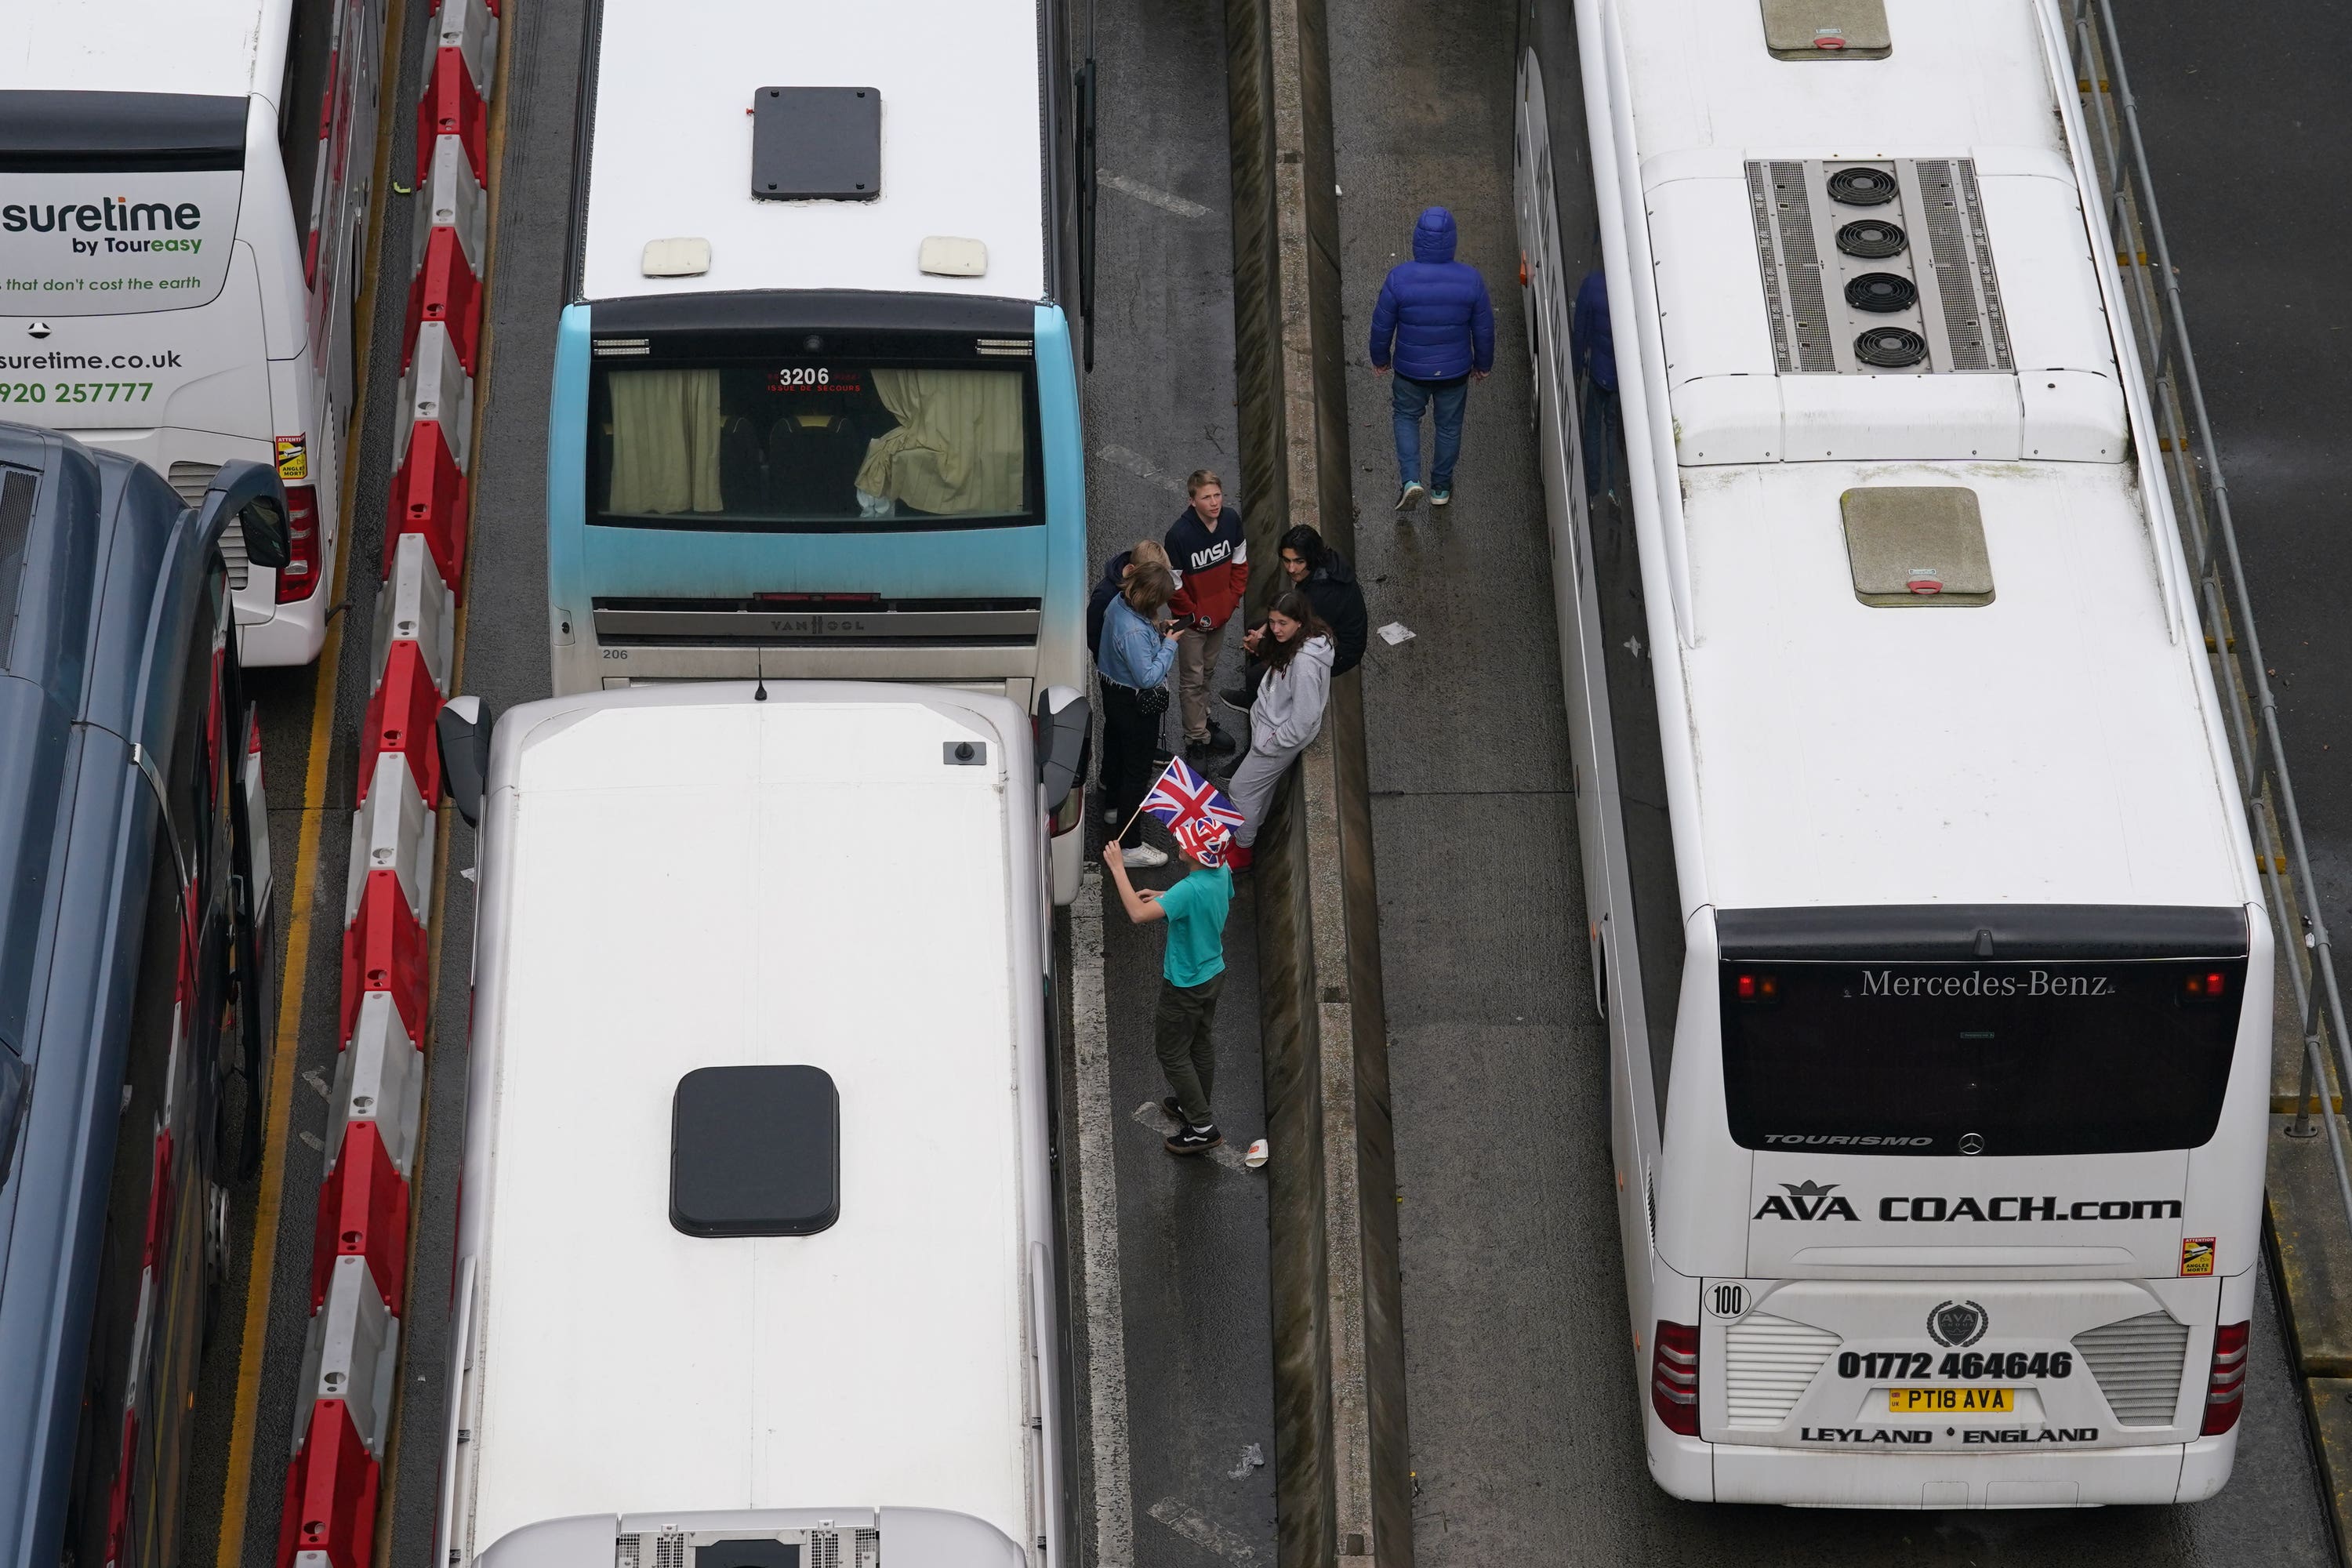 Coach operators have claimed their vehicles were ‘treated unfairly’ after thousands of passengers were stranded at the Port of Dover for up to 24 hours over the weekend (Gareth Fuller/PA)